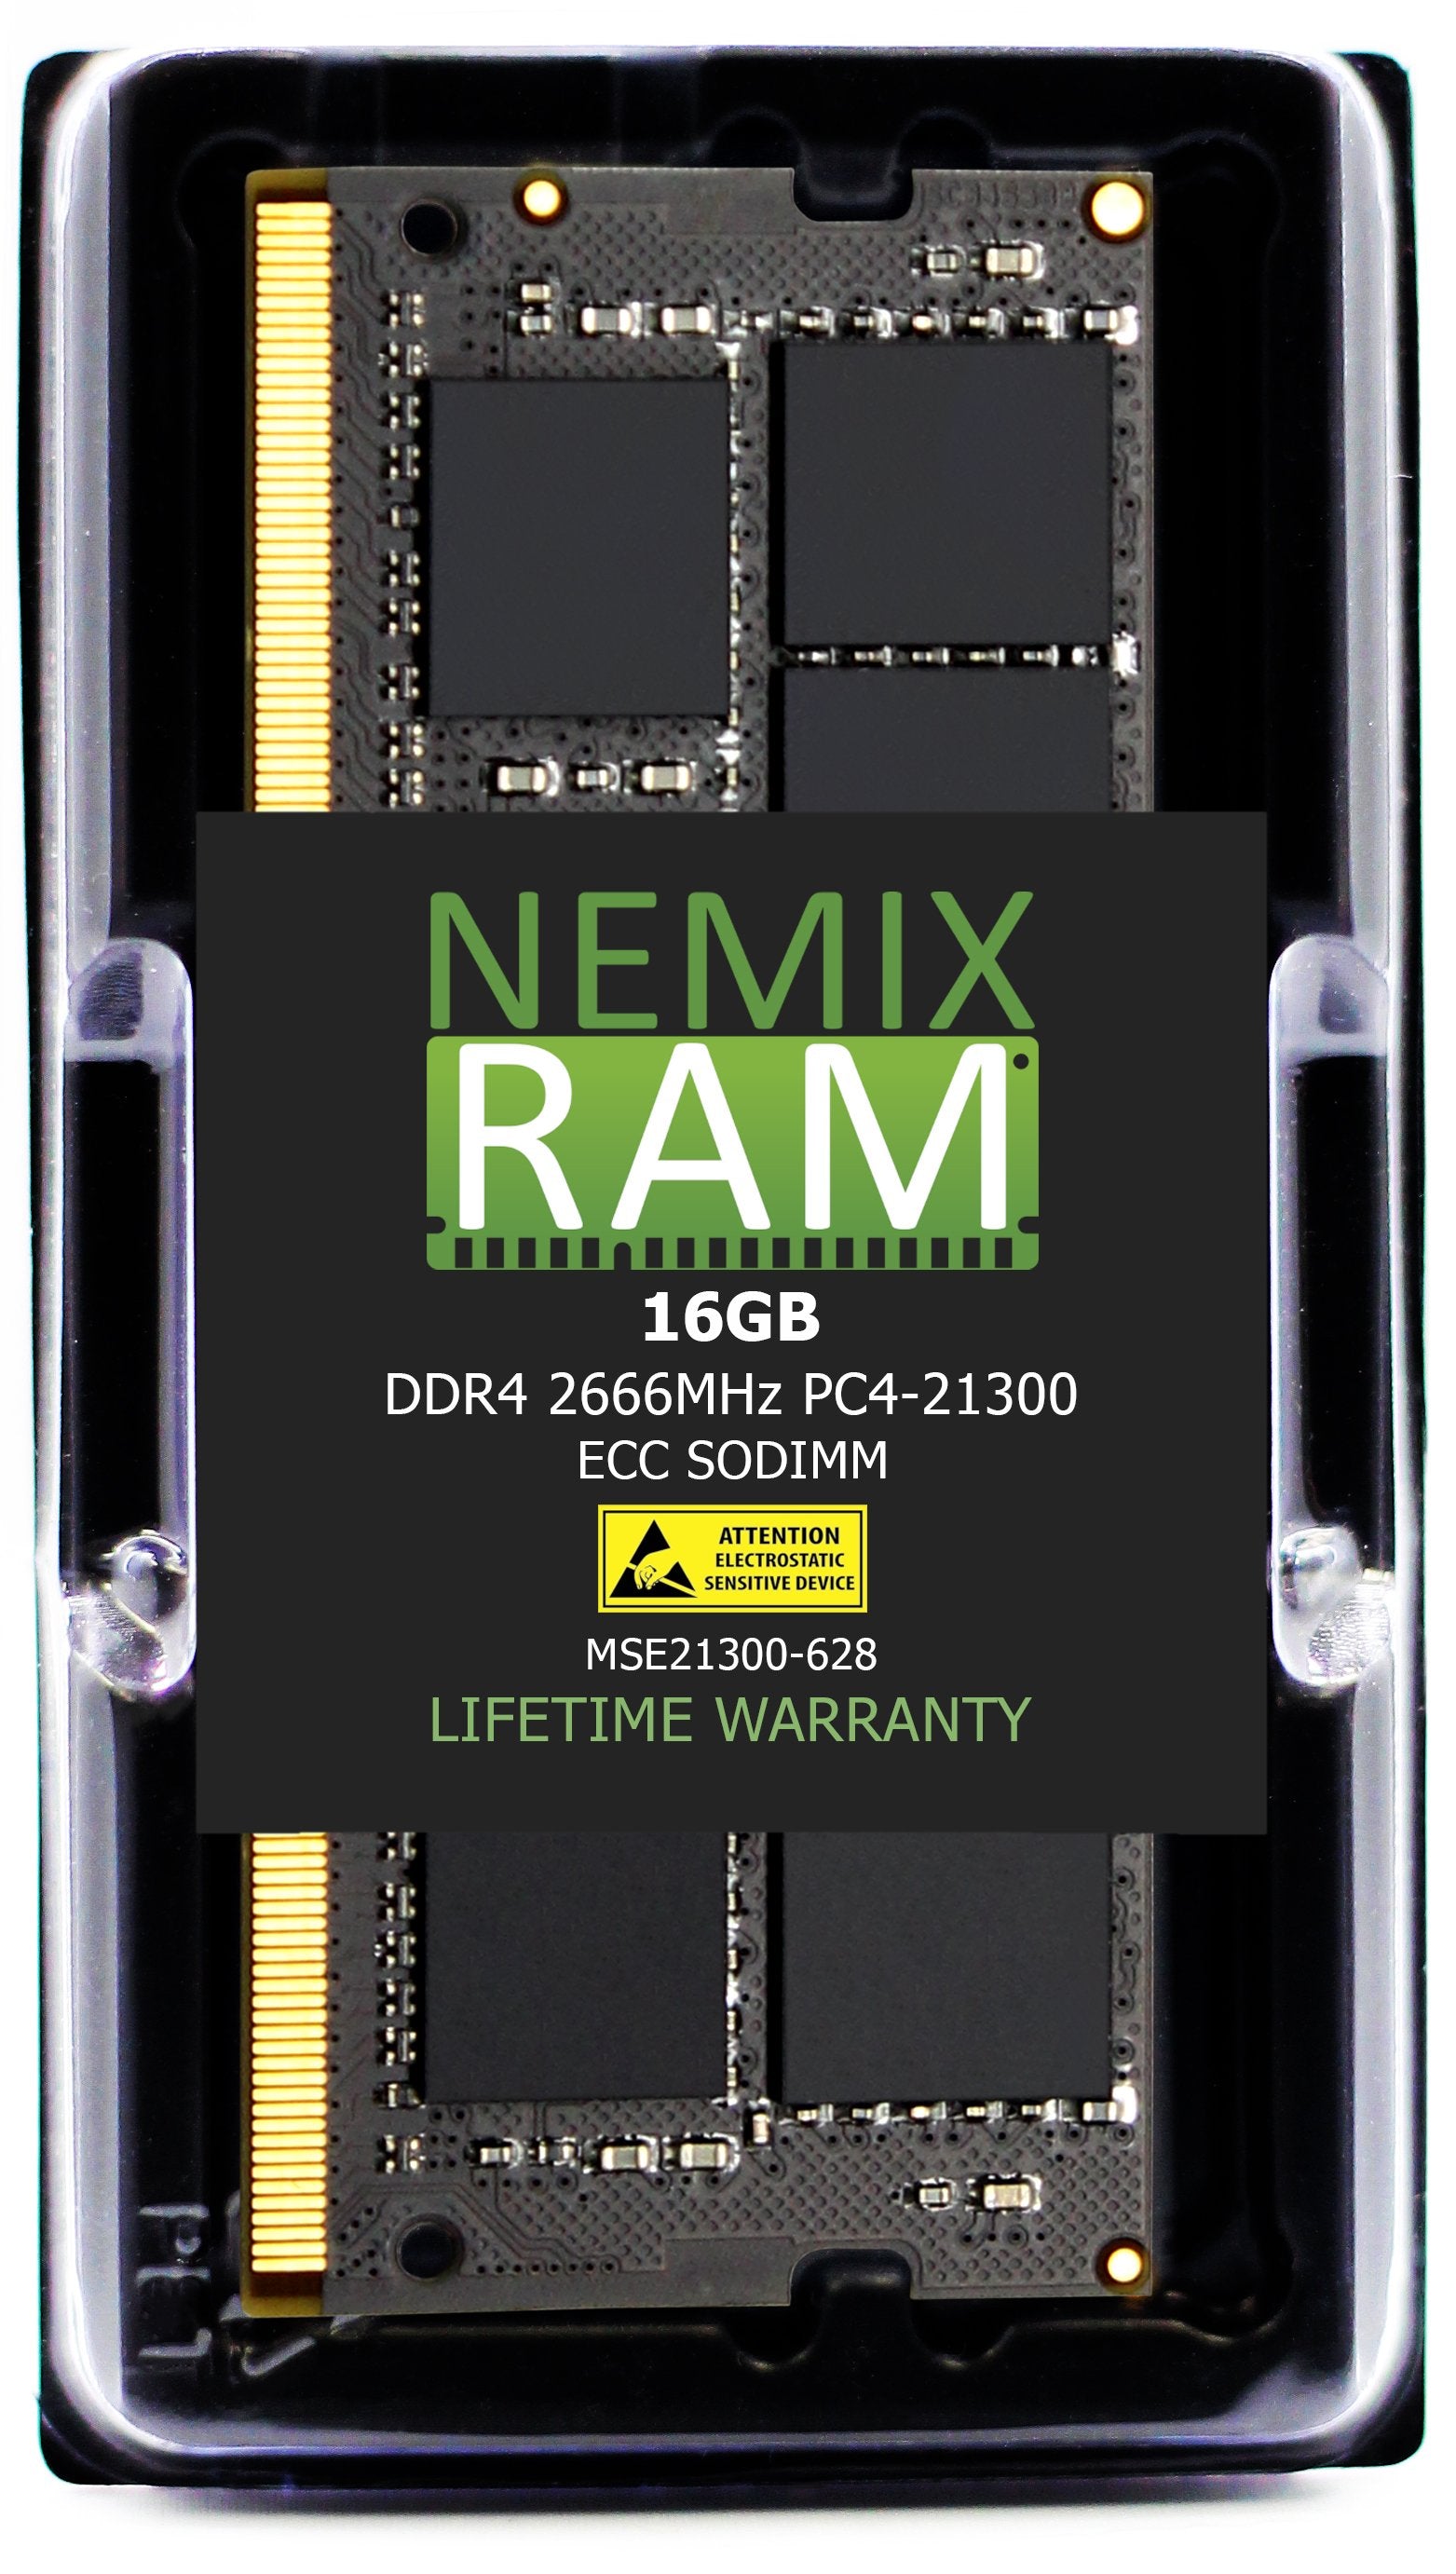 DDR4 2666MHZ PC4-21300 ECC SODIMM Compatible with Synology RackStation RS822RP+